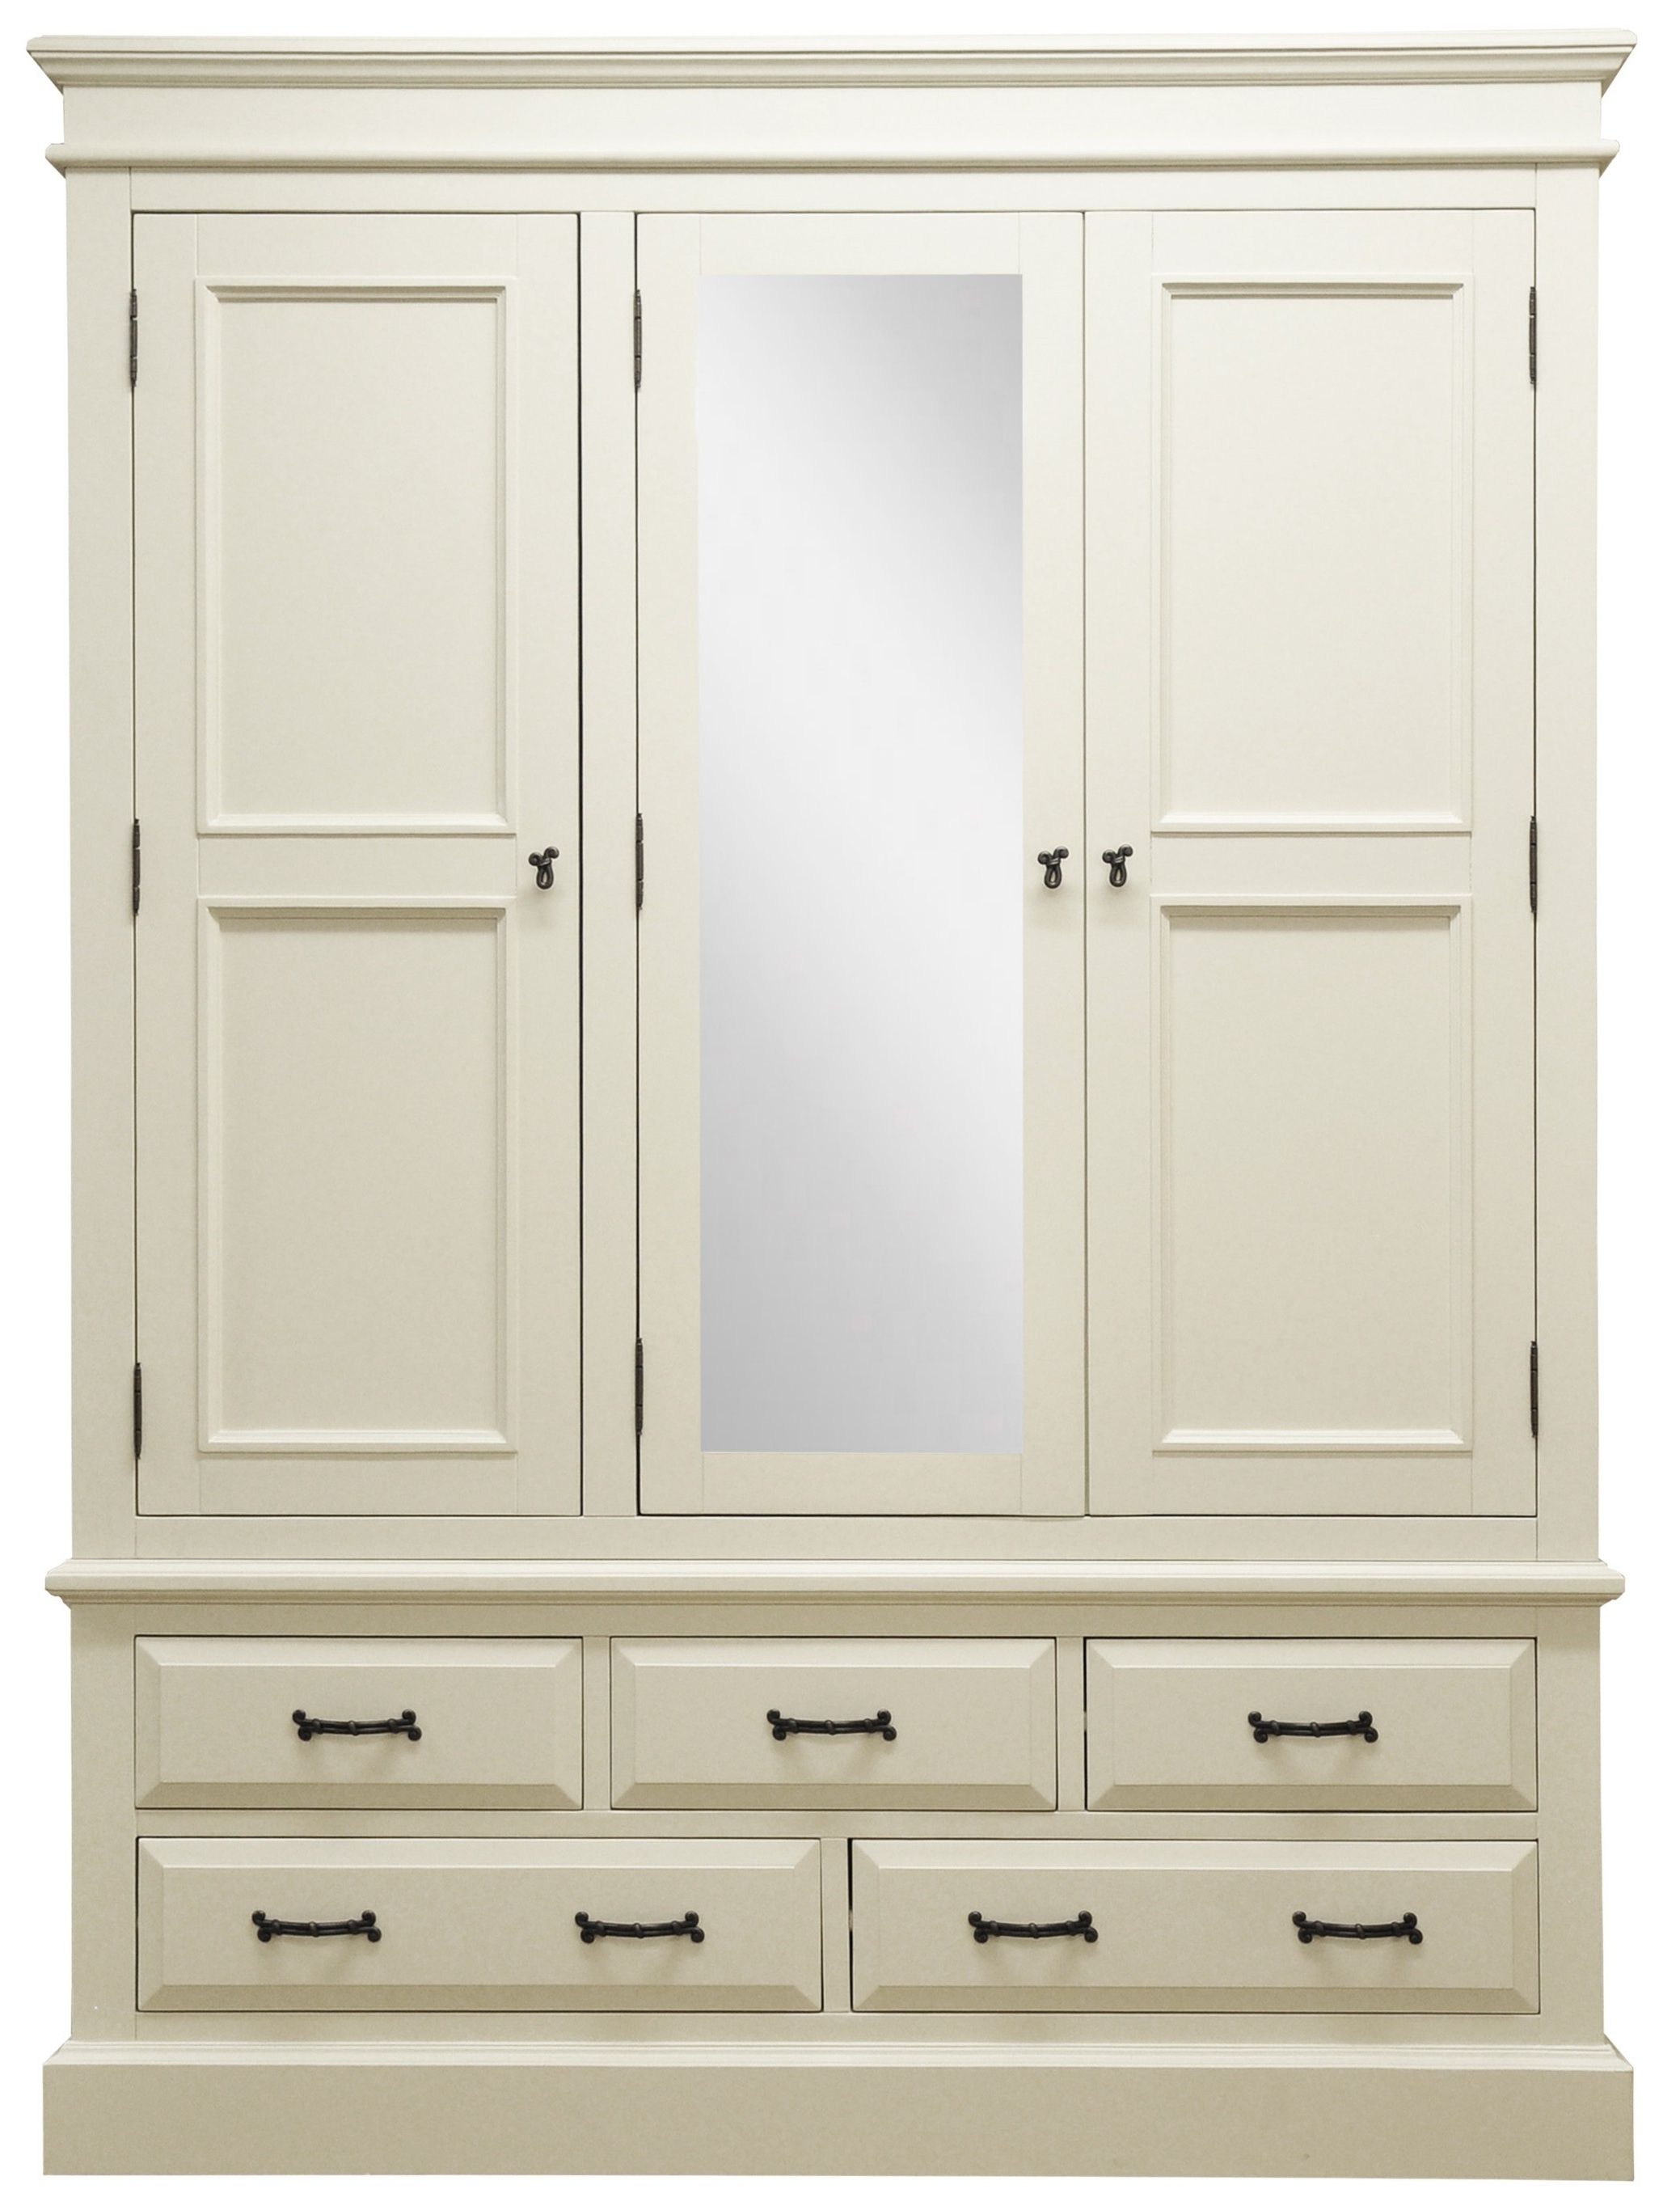 Newest White Wood Wardrobes With Drawers Pertaining To White Wooden Wardrobe With Five Drawers And Doors Also Mirror Of (View 13 of 15)